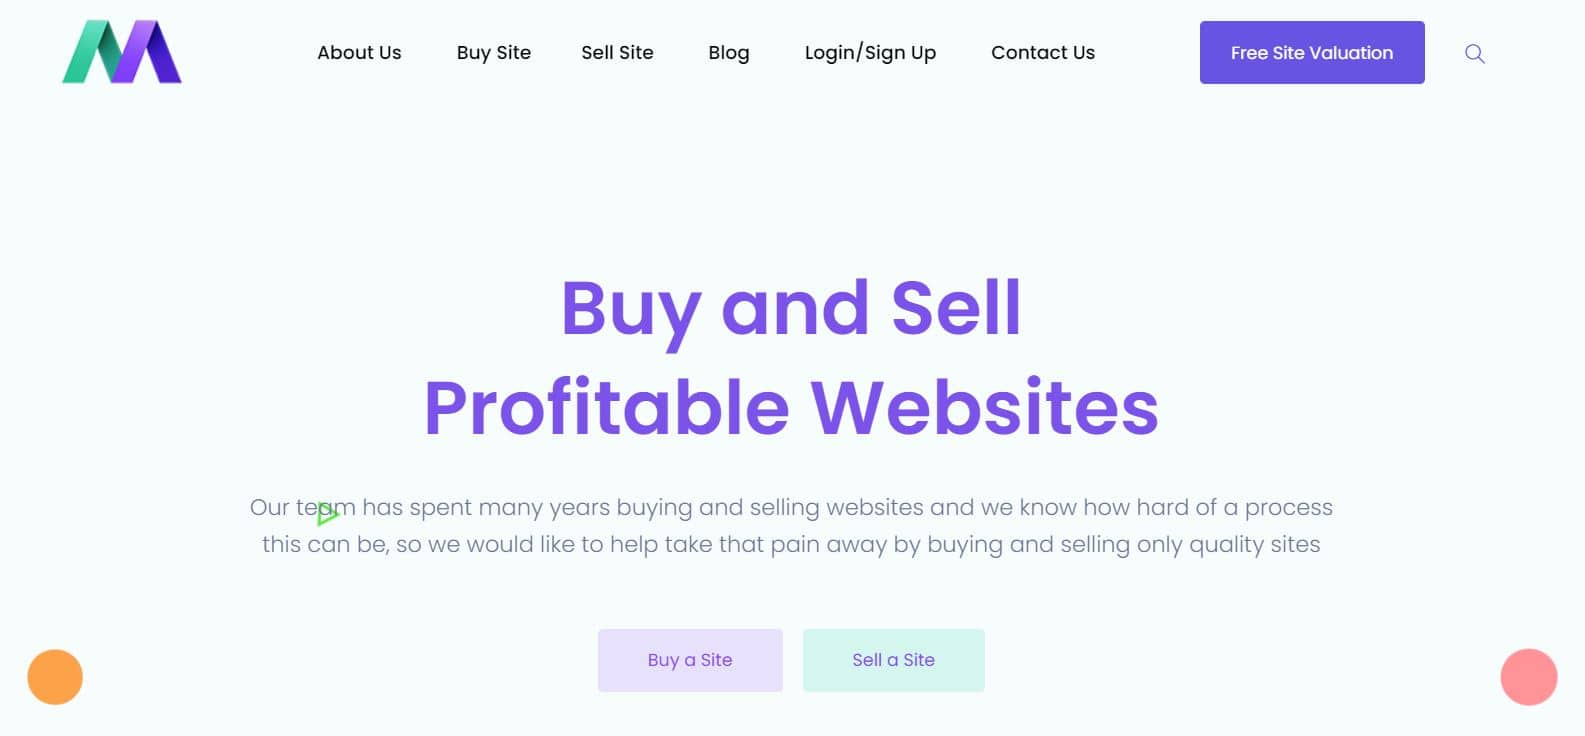 Where To Buy Online Businesses For Sale